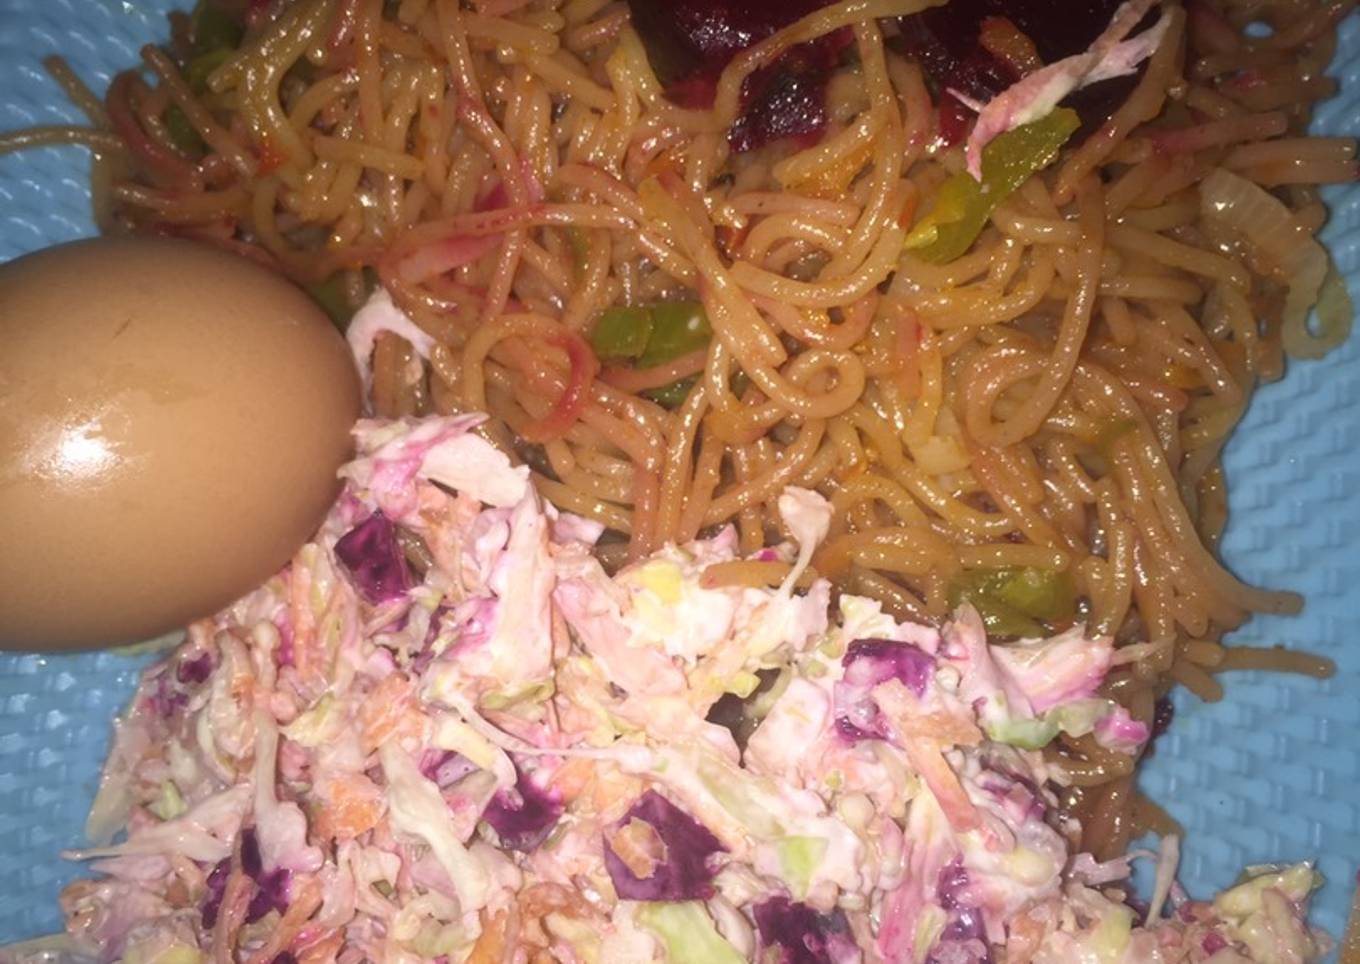 Fried spaghetti with betruis coleslaw